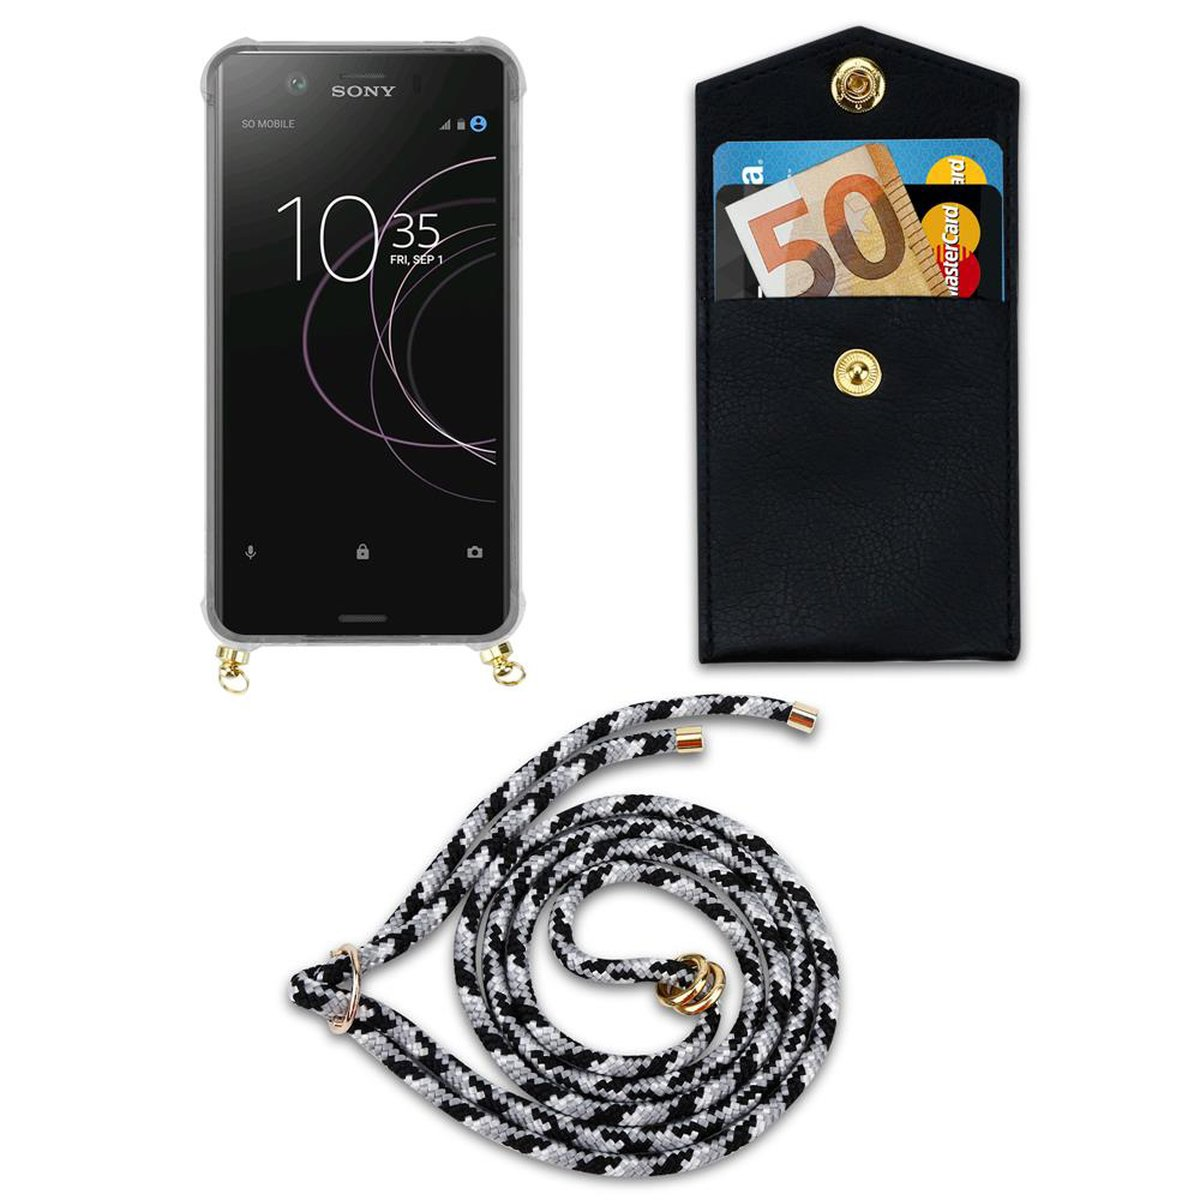 CADORABO Handy Kette Gold mit Hülle, Sony, SCHWARZ Xperia abnehmbarer Band Kordel CAMOUFLAGE und XZ1, Ringen, Backcover